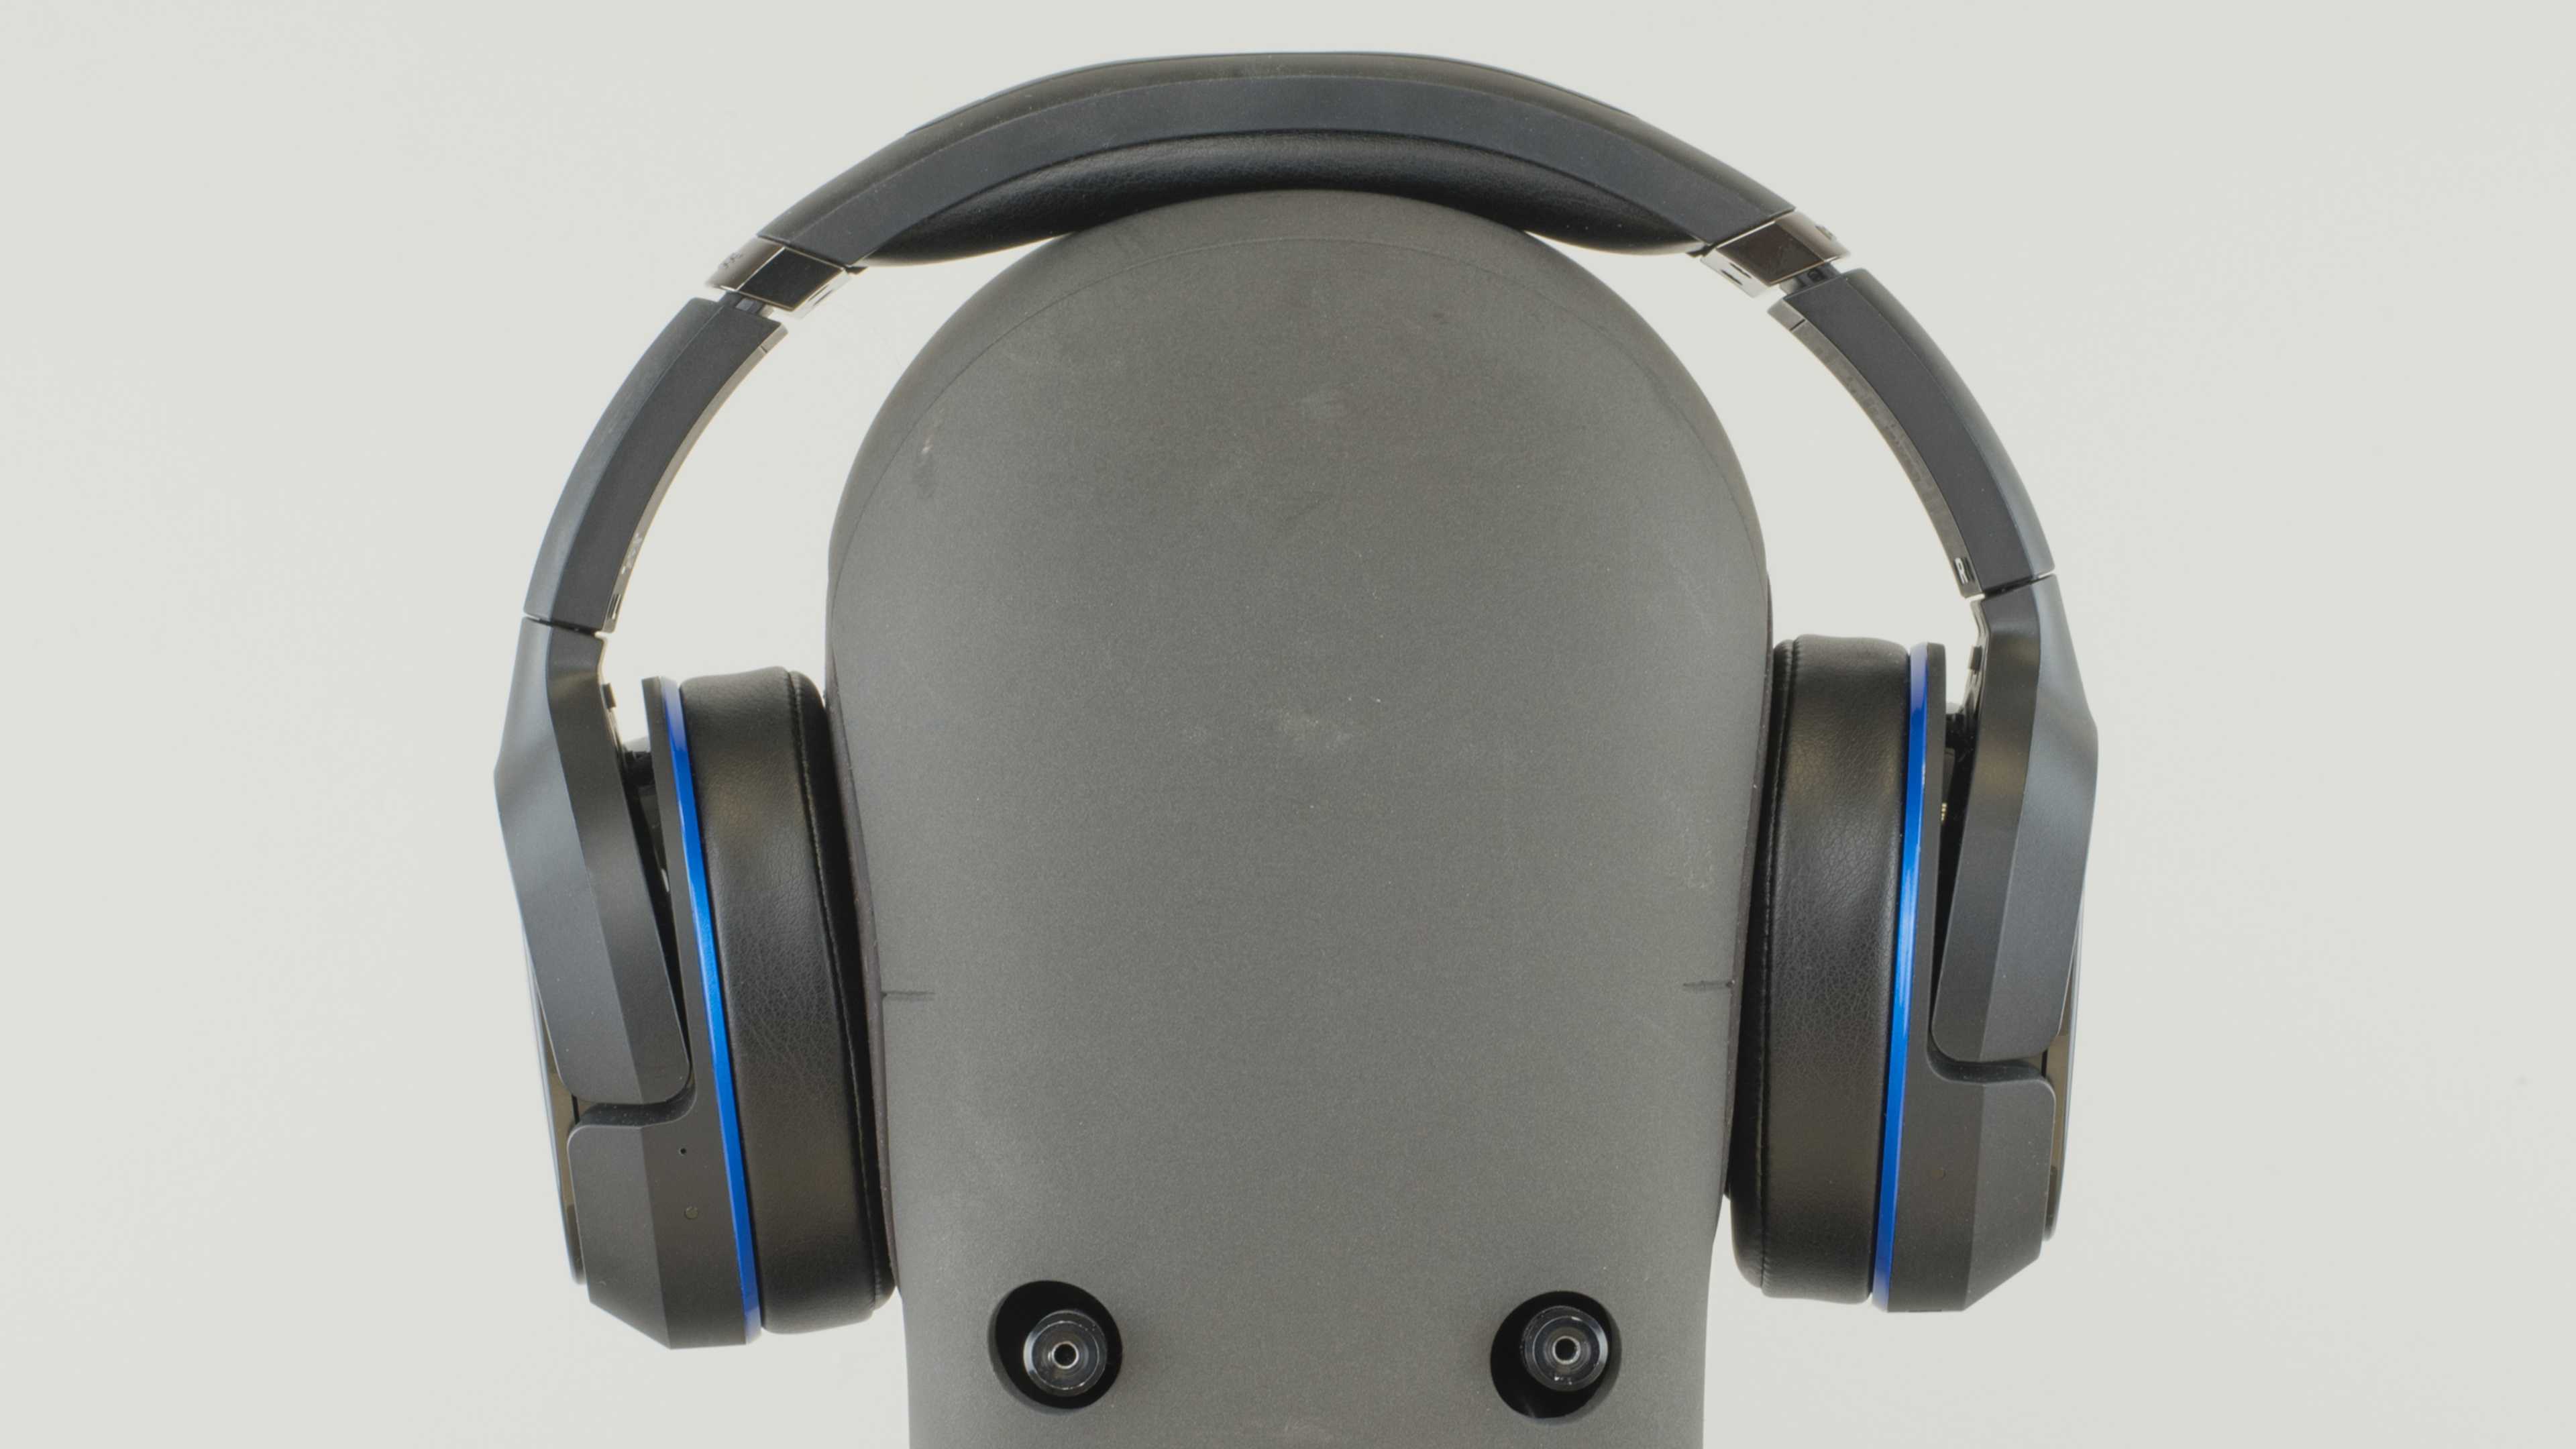 Turtle beach elite 800 review | trusted reviews